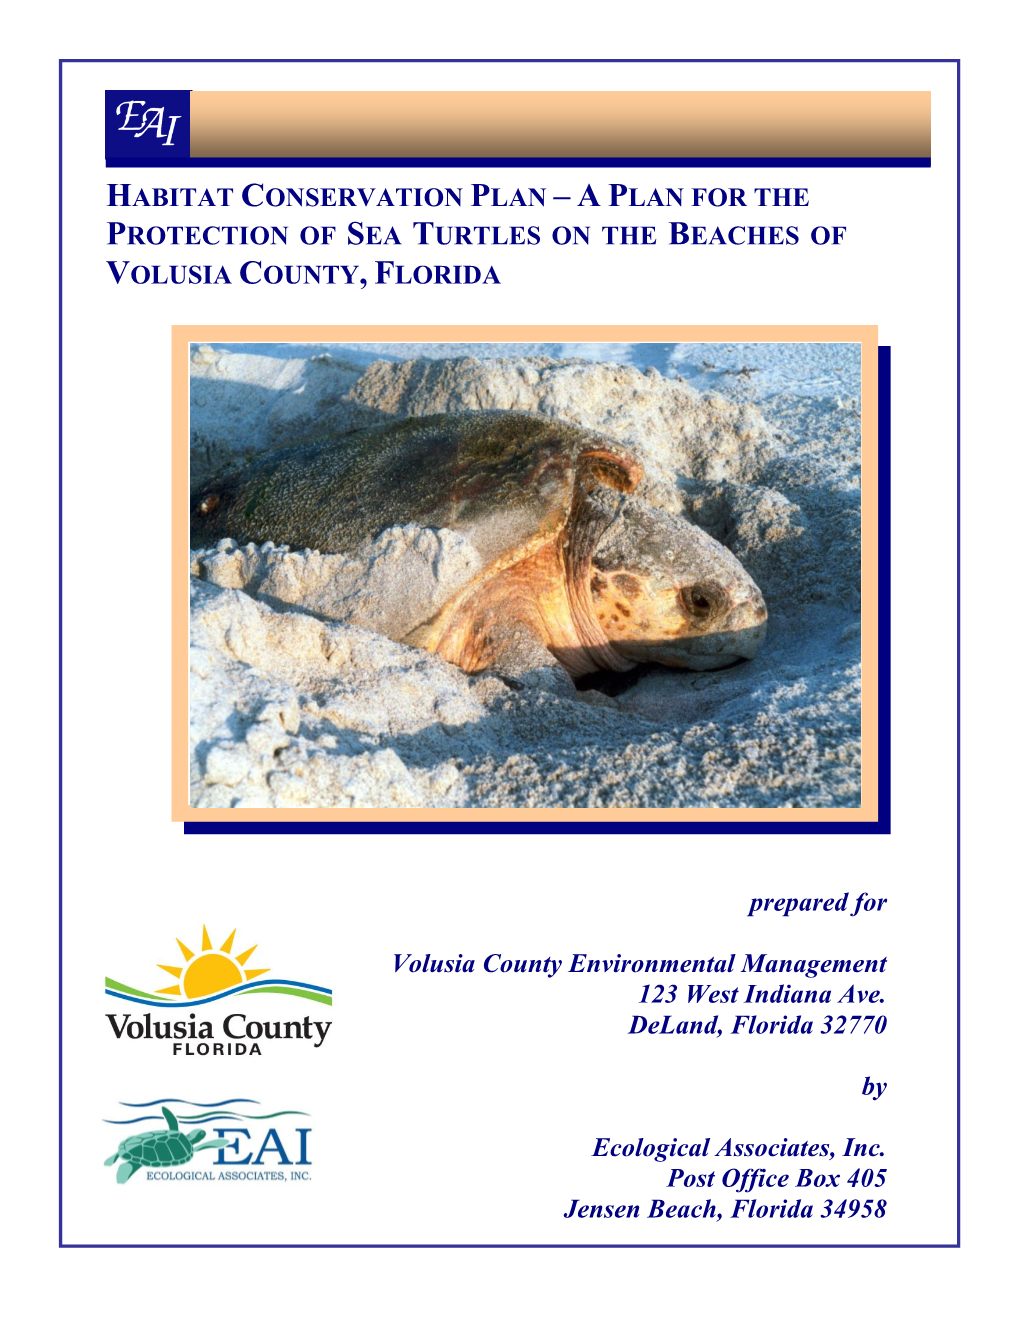 Habitat Conservation Plan (HCP), a Statutory Component of the ITP Application, Was Prepared and Submitted to the USFWS